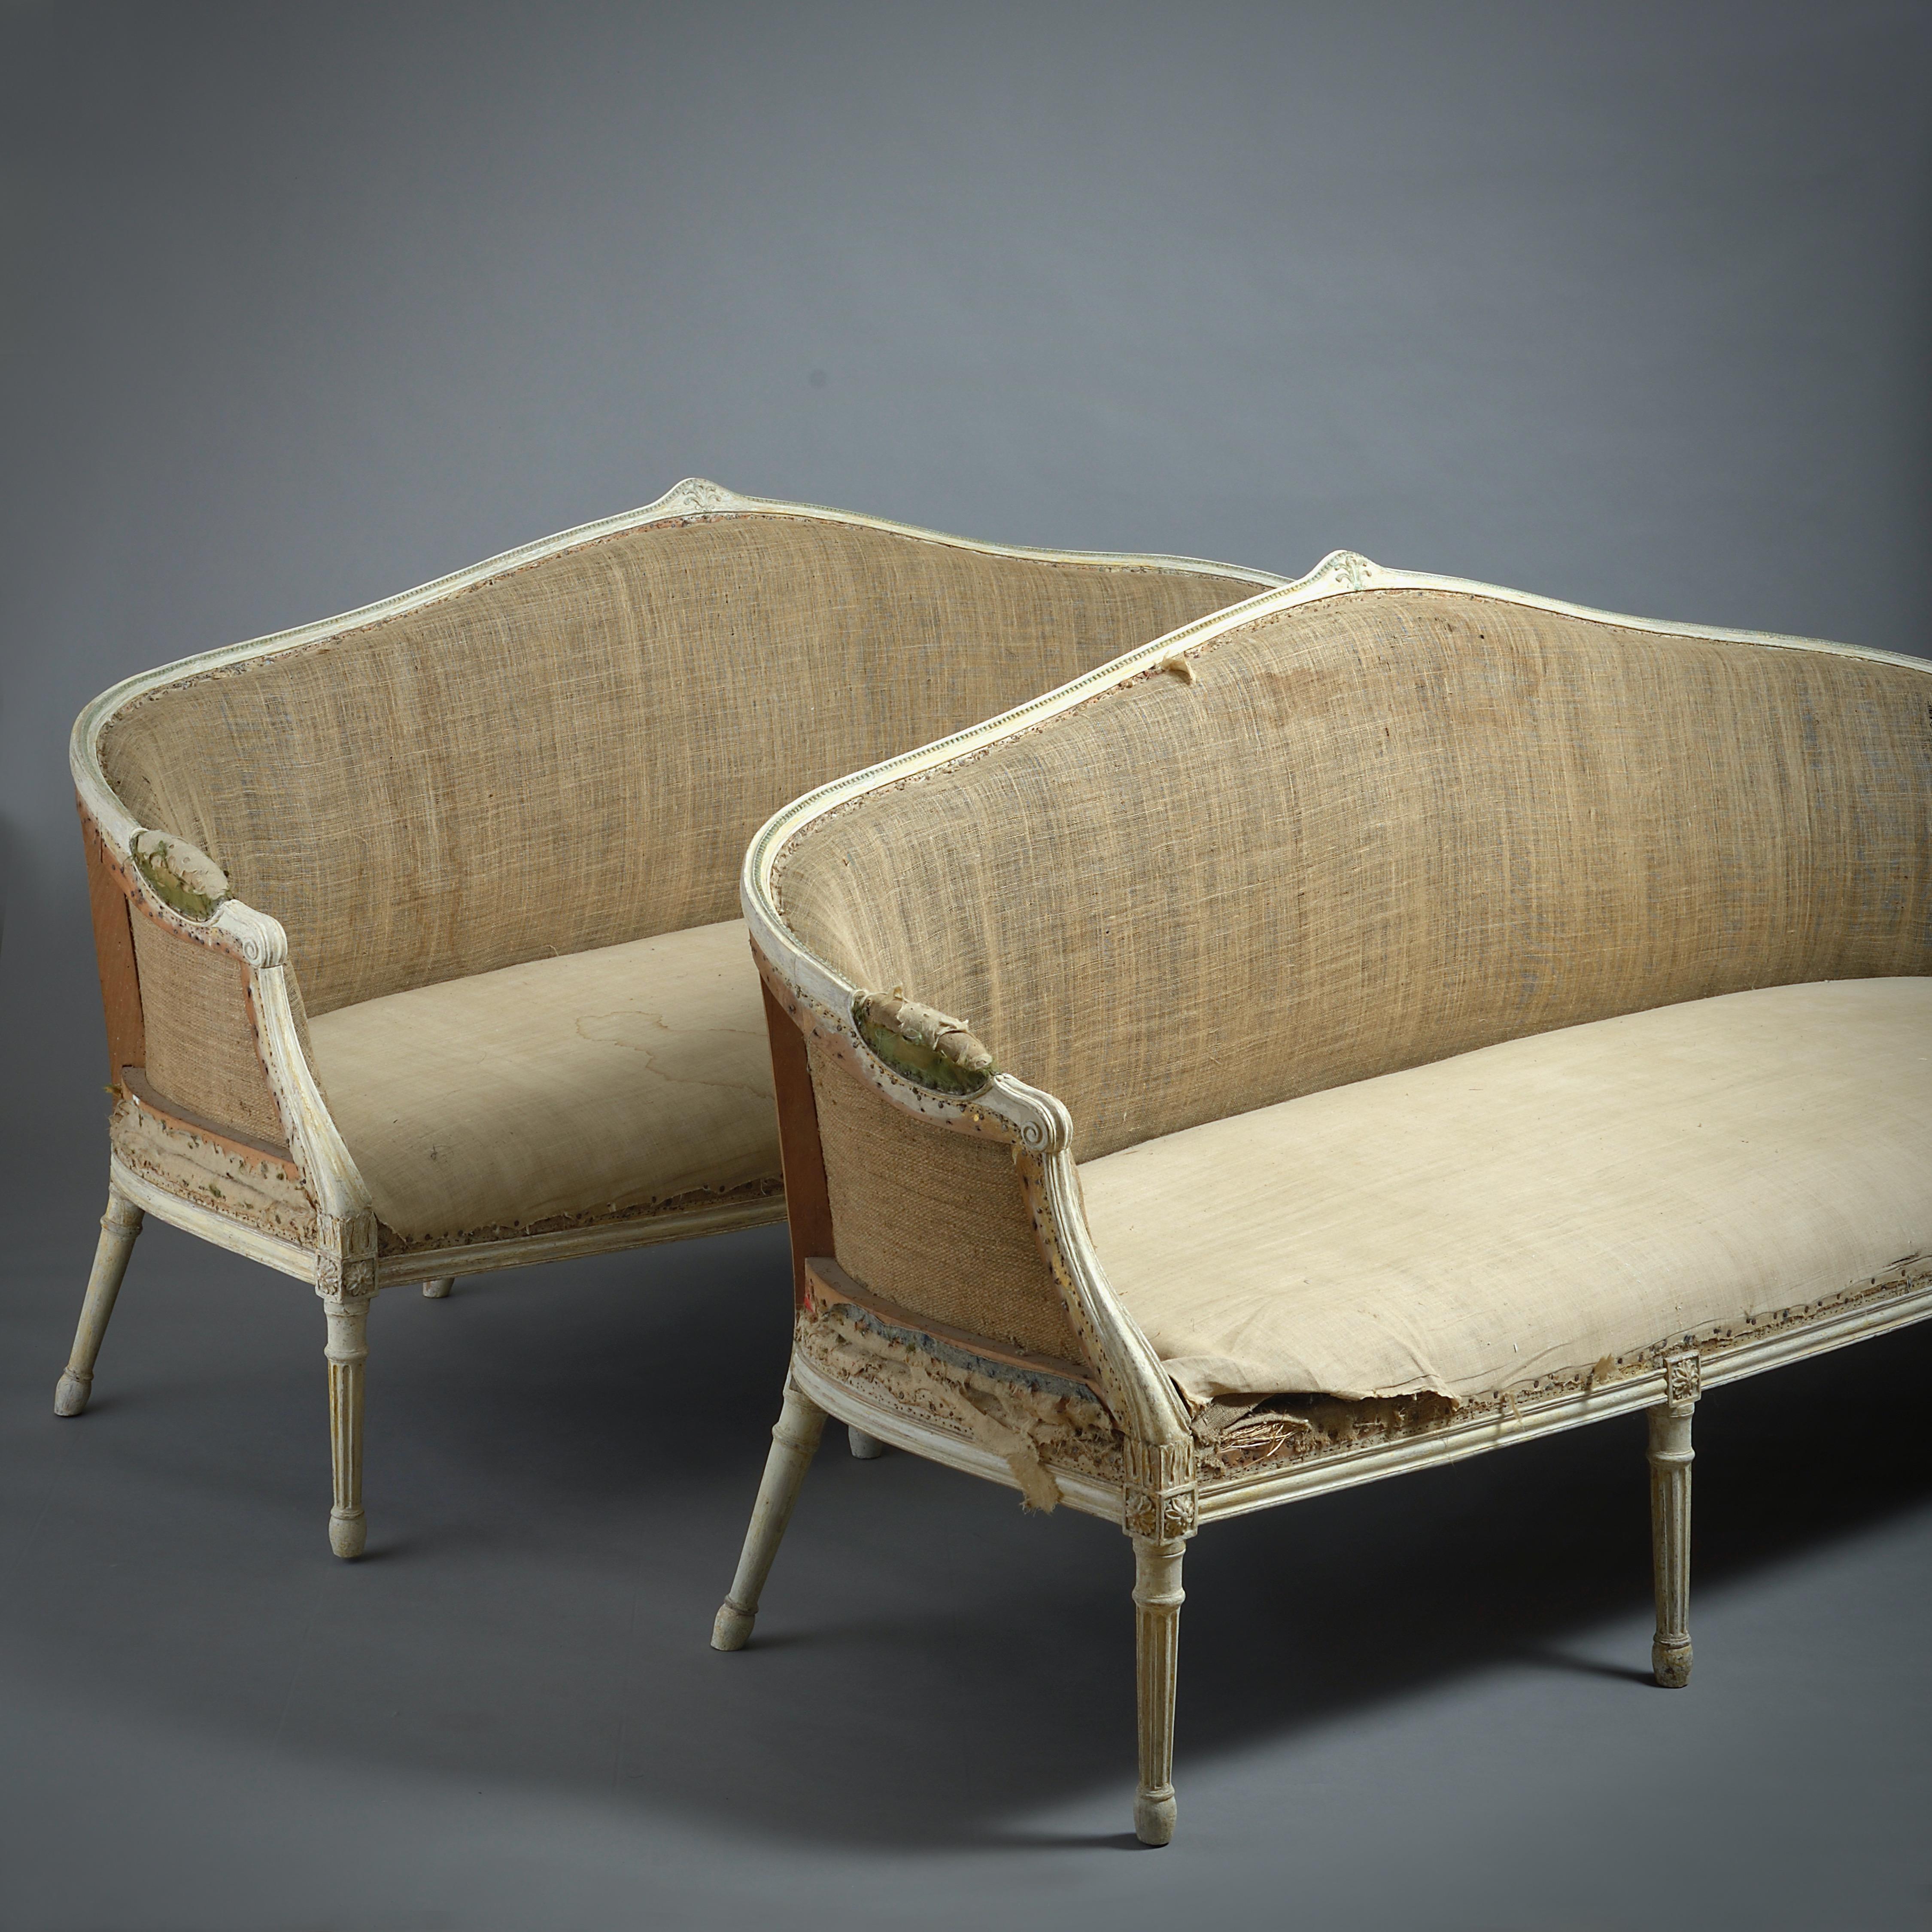 A FINE AND RARE PAIR OF GEORGE III GREEN AND WHITE PAINTED SOFAS ATTRIBUTED TO JOHN LINNELL, CIRCA 1775.

Dry-scraped back to their original paint.

PROVENANCE:
by descent in the Davenport family, Davenport House, Shropshire